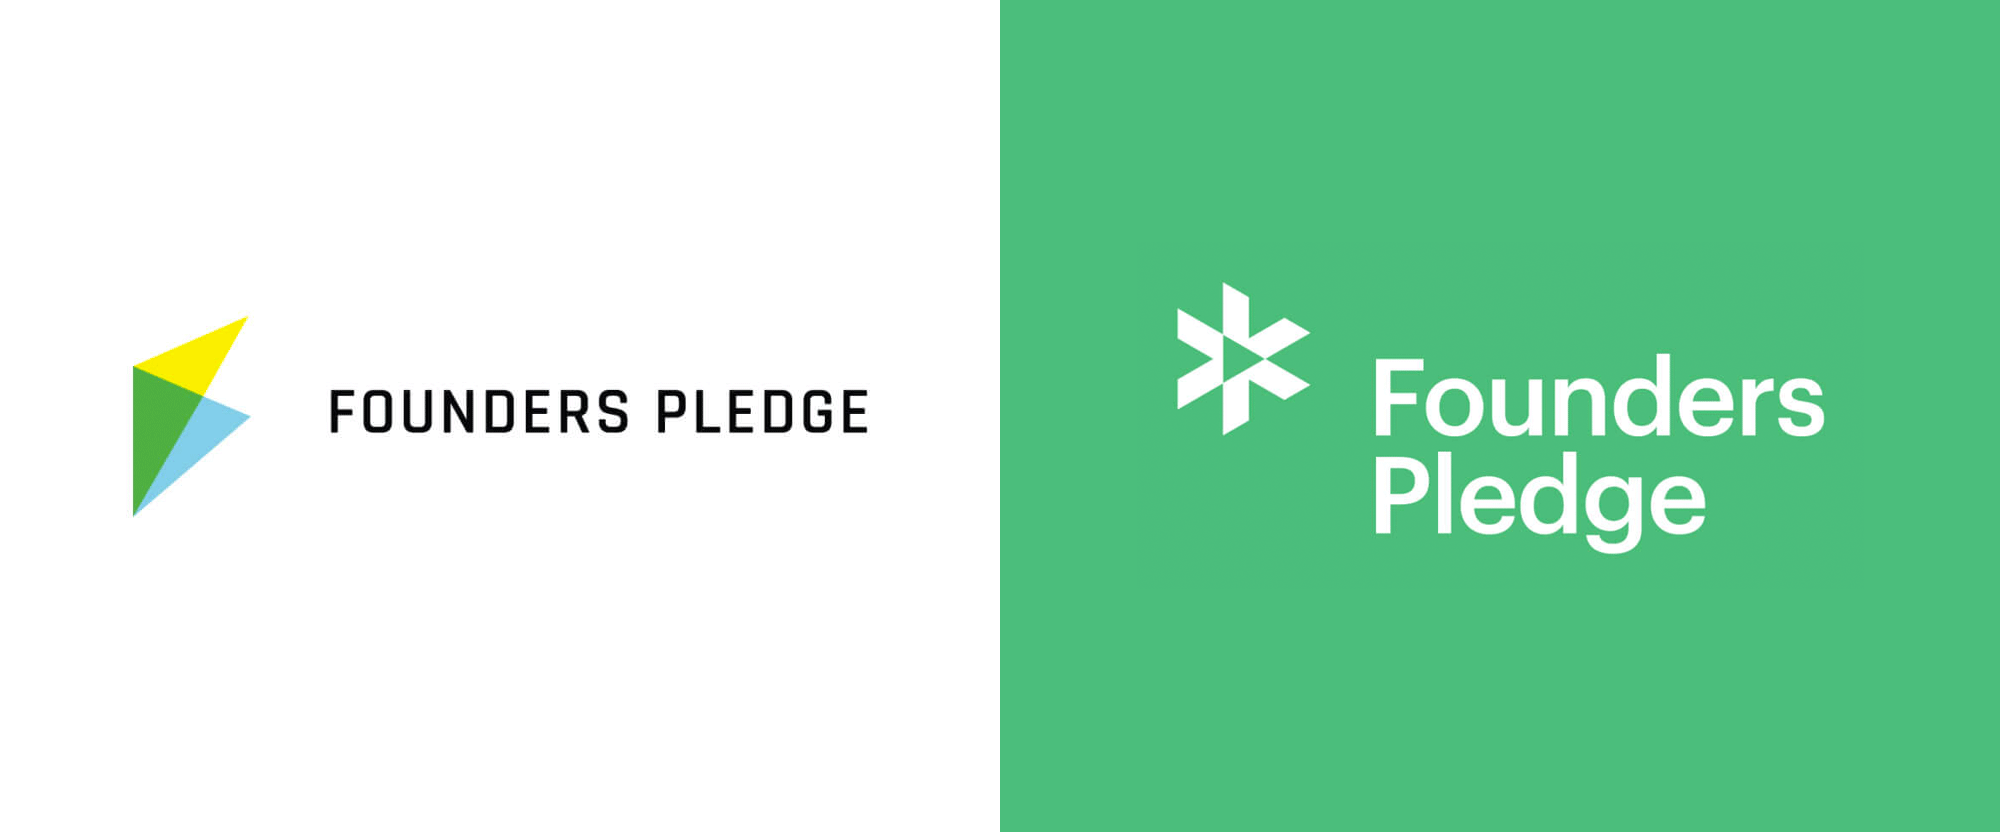 New Logo and Identity for Founders Pledge by Mast